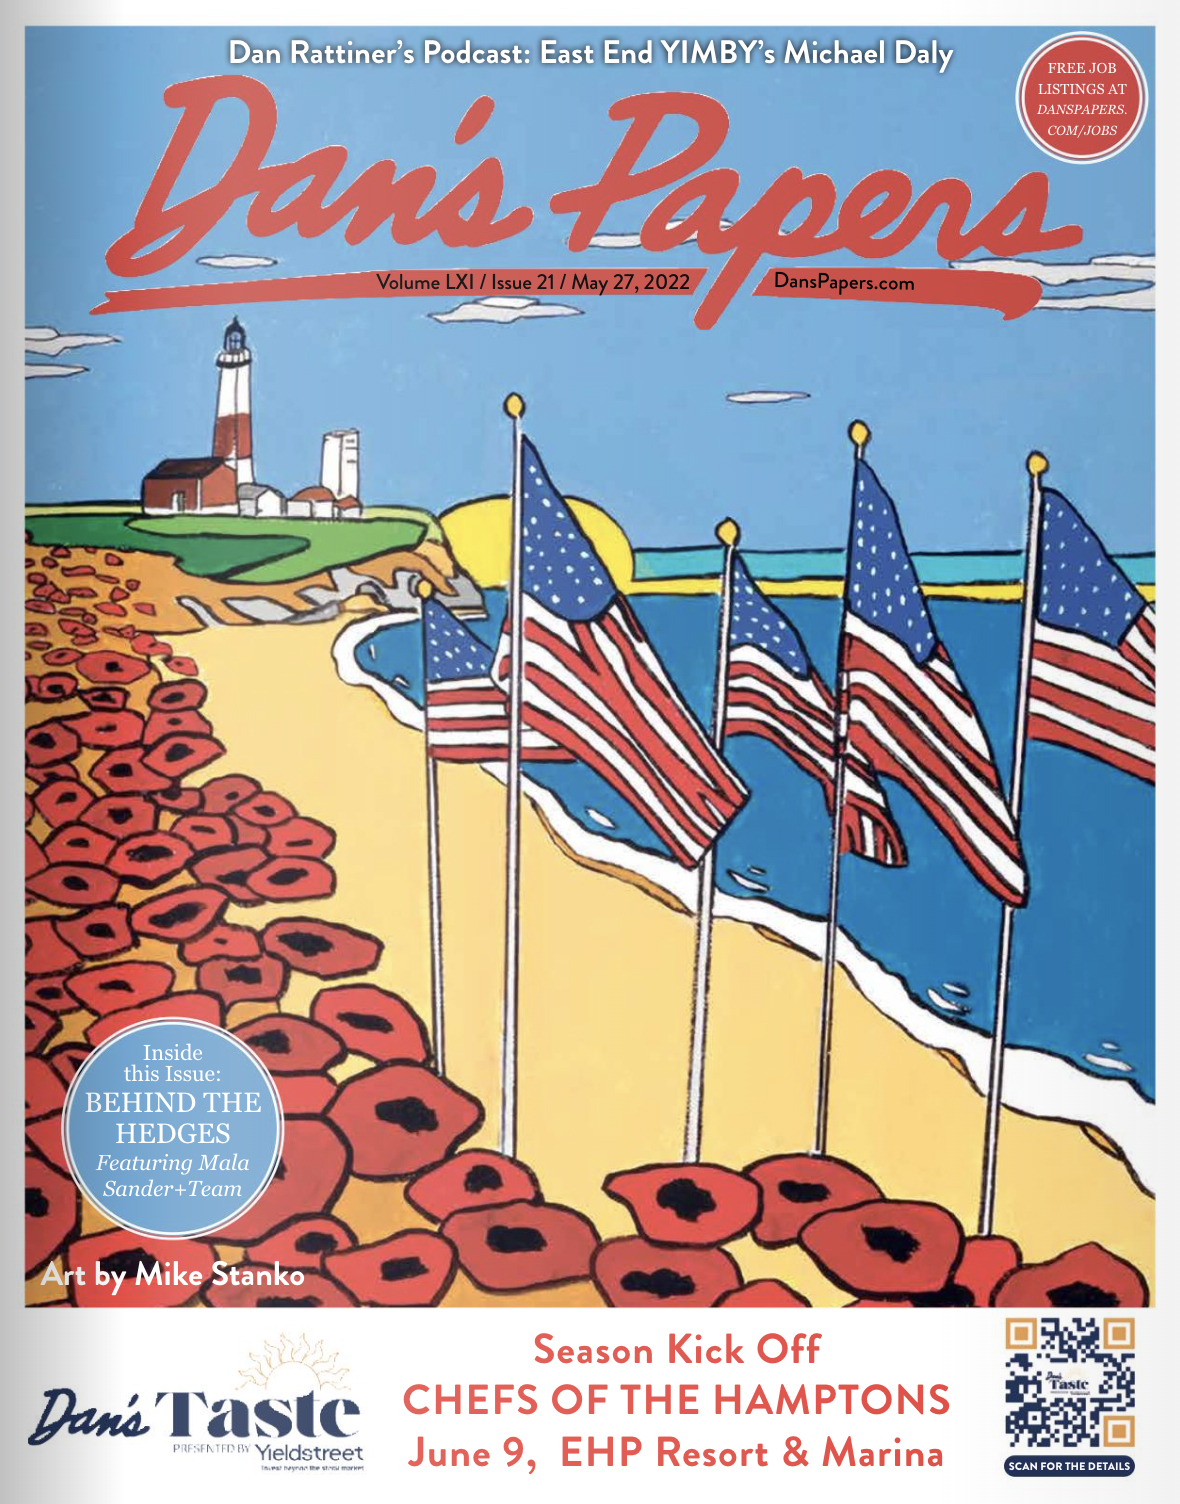 Dan's Papers May 27, 2022 cover art by Mike Stanko